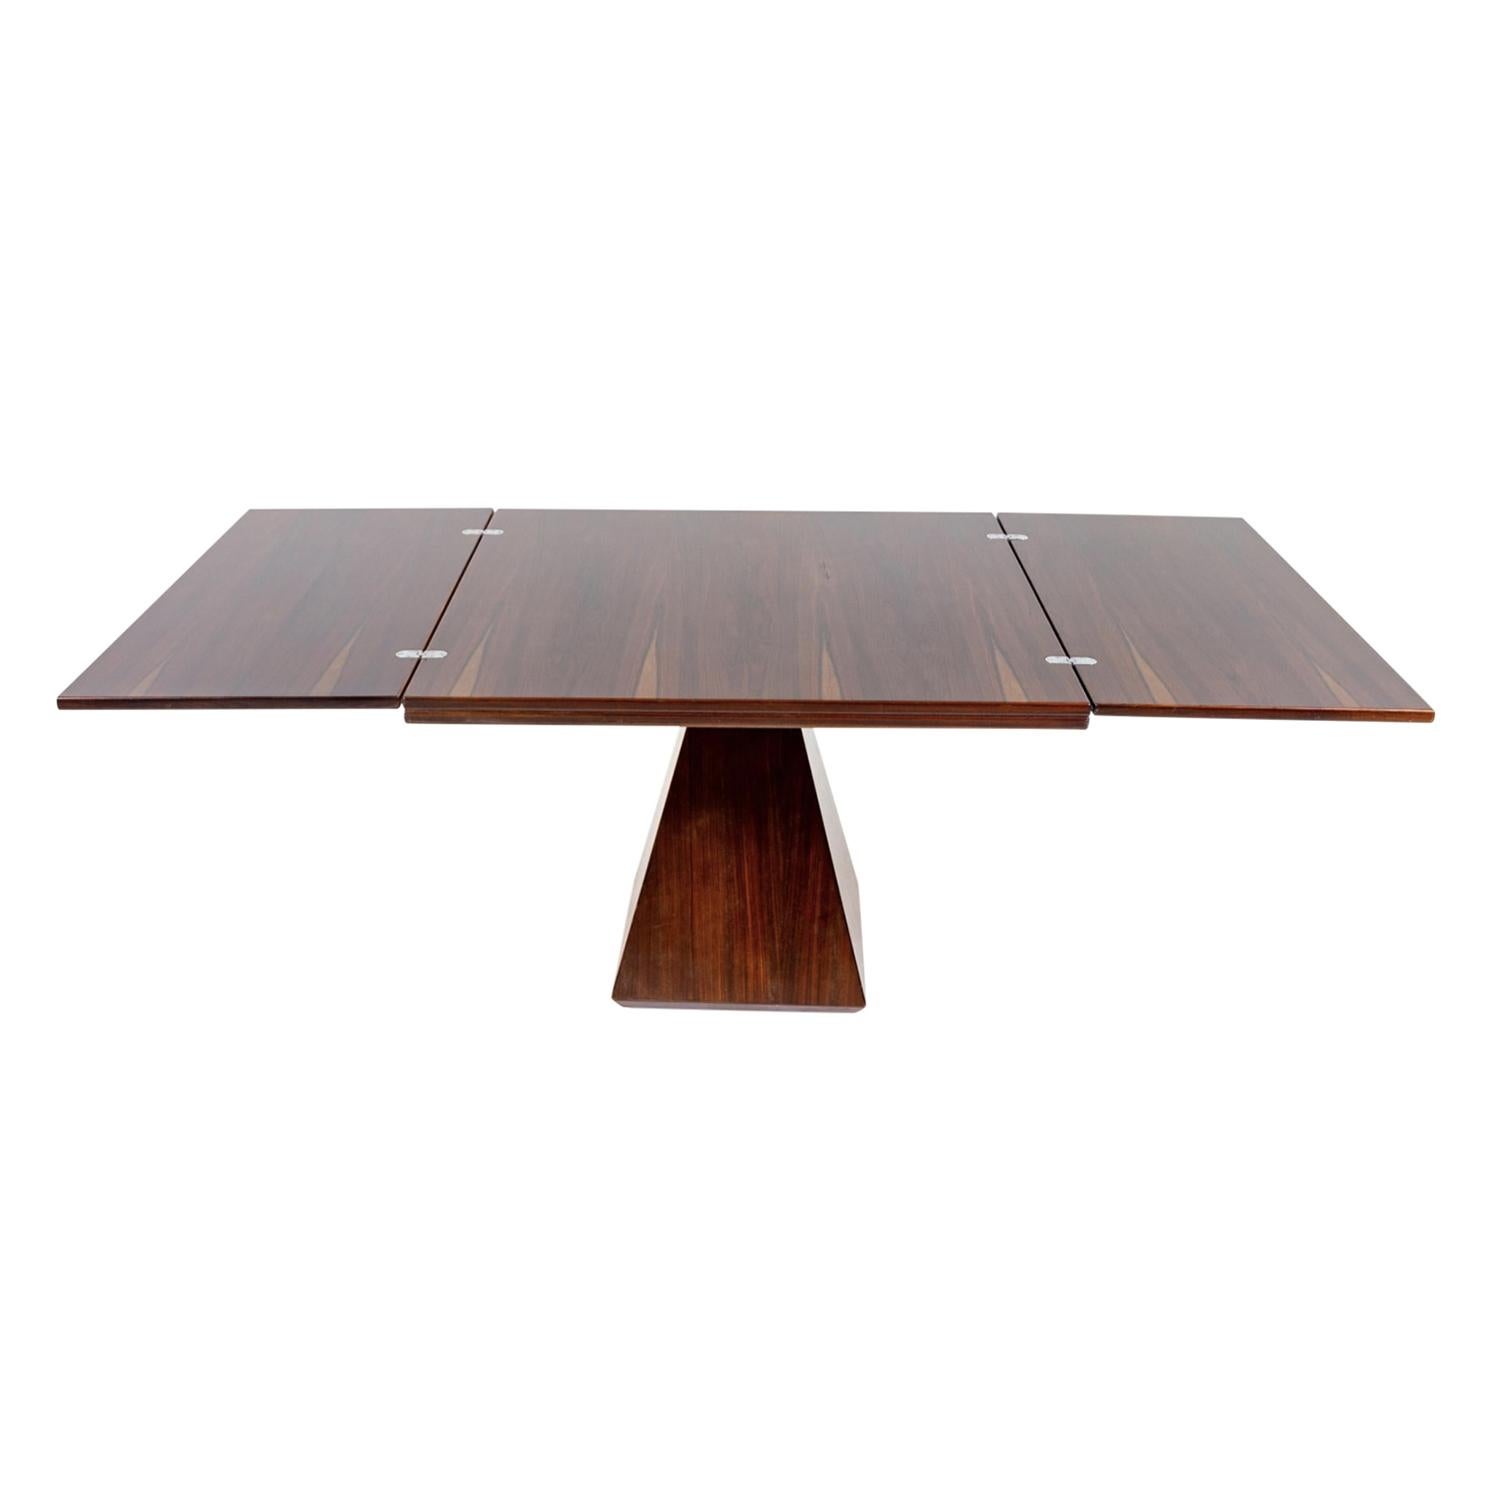 20th Century Italian Saporiti Extendable Mahogany Table by Vittorio Introini In Good Condition For Sale In West Palm Beach, FL